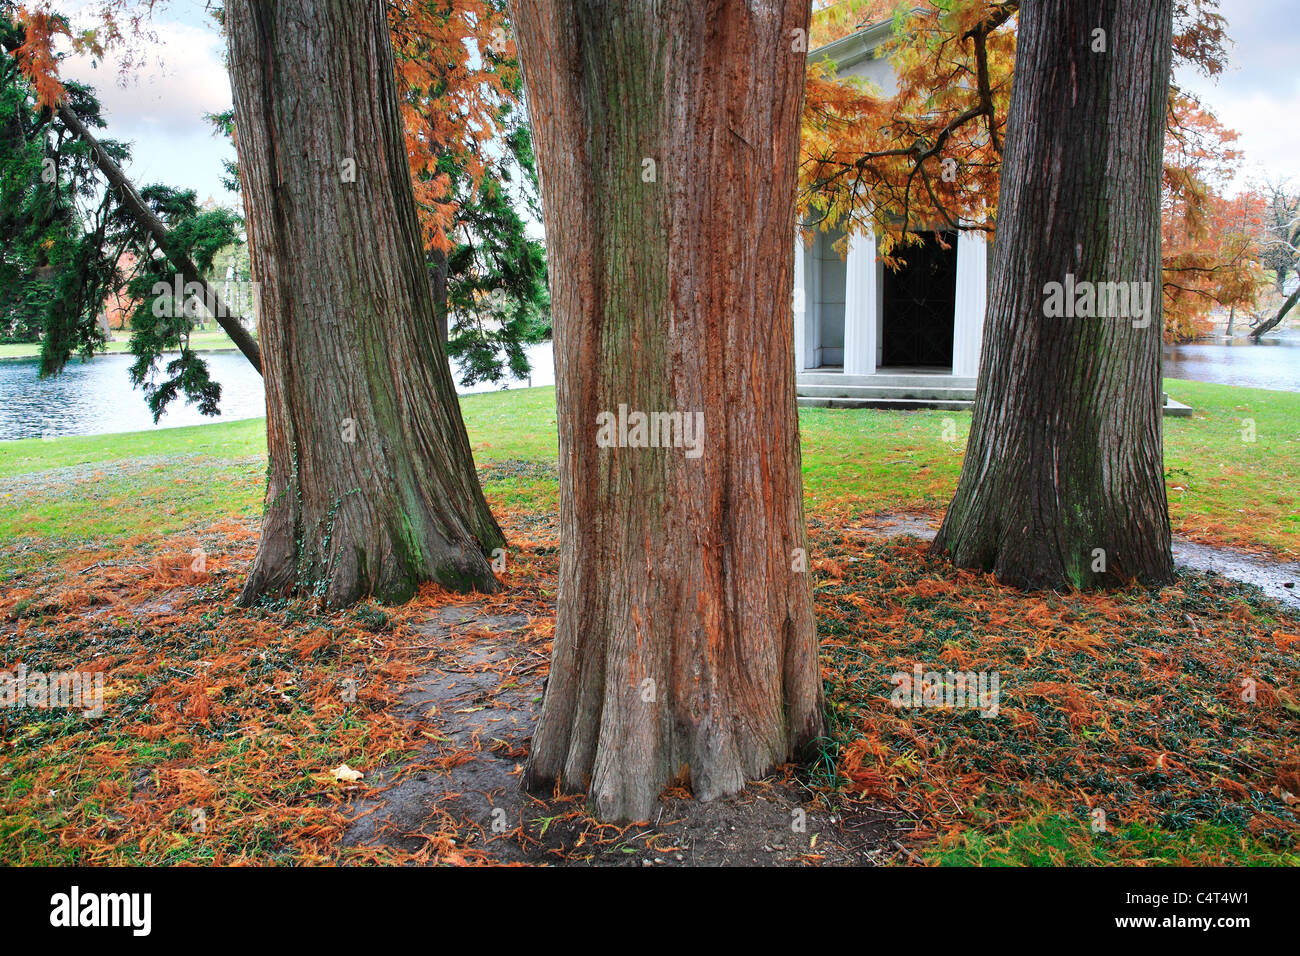 A Cemetery Mausoleum And Three Stately Trunks Of The Eastern Red Cedar Tree In Autumn, Southwestern Ohio,, USA Stock Photo